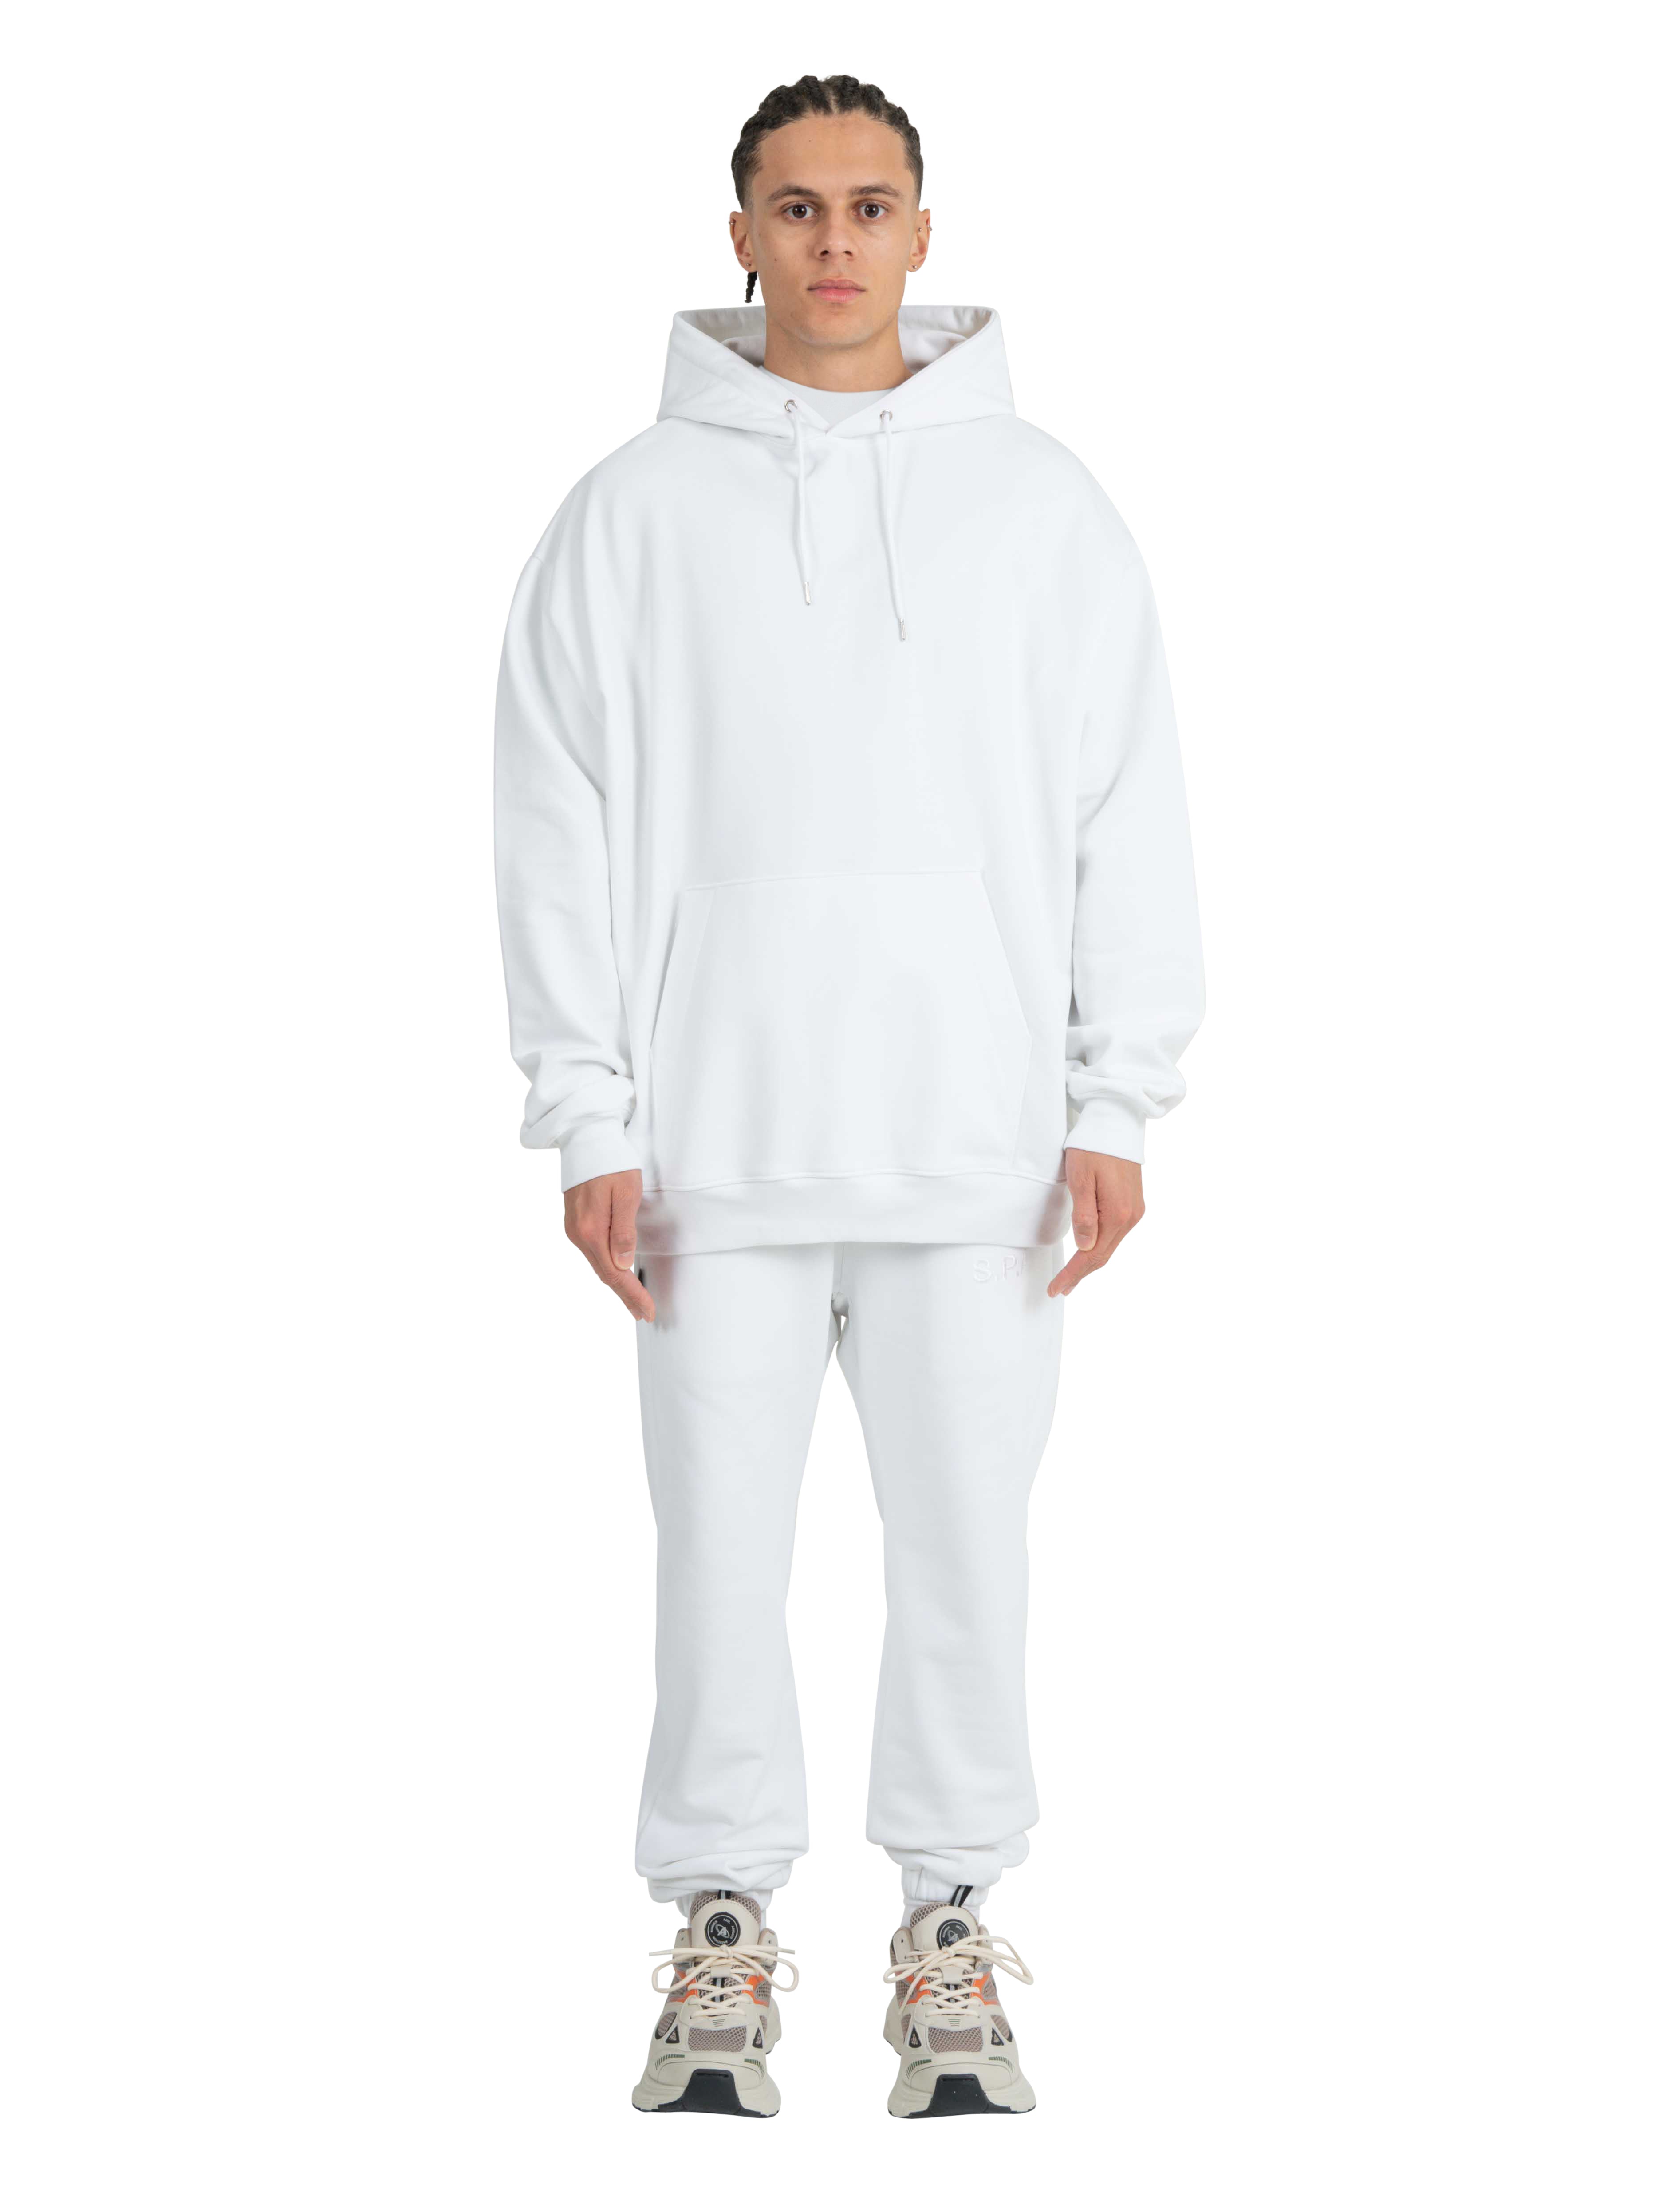 Leg Embroidery Tracksuit Bottoms - White